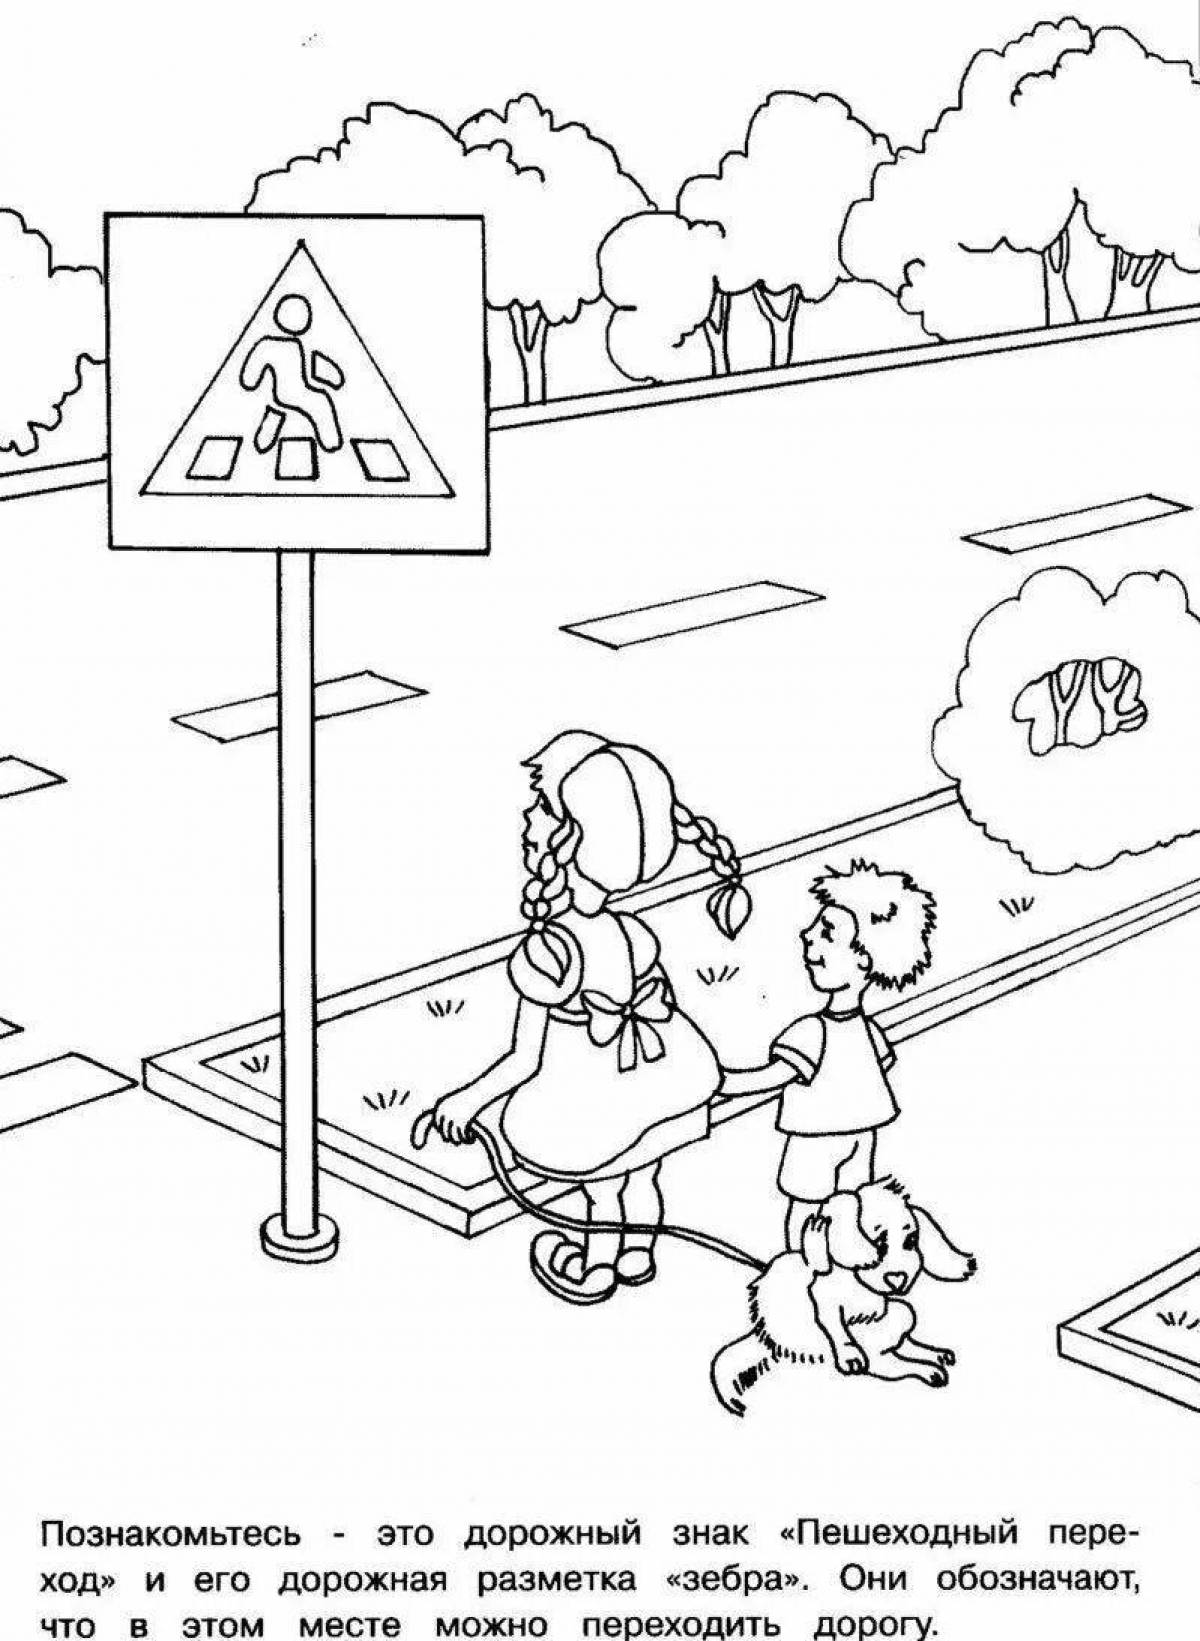 Fun coloring book of traffic rules for kids